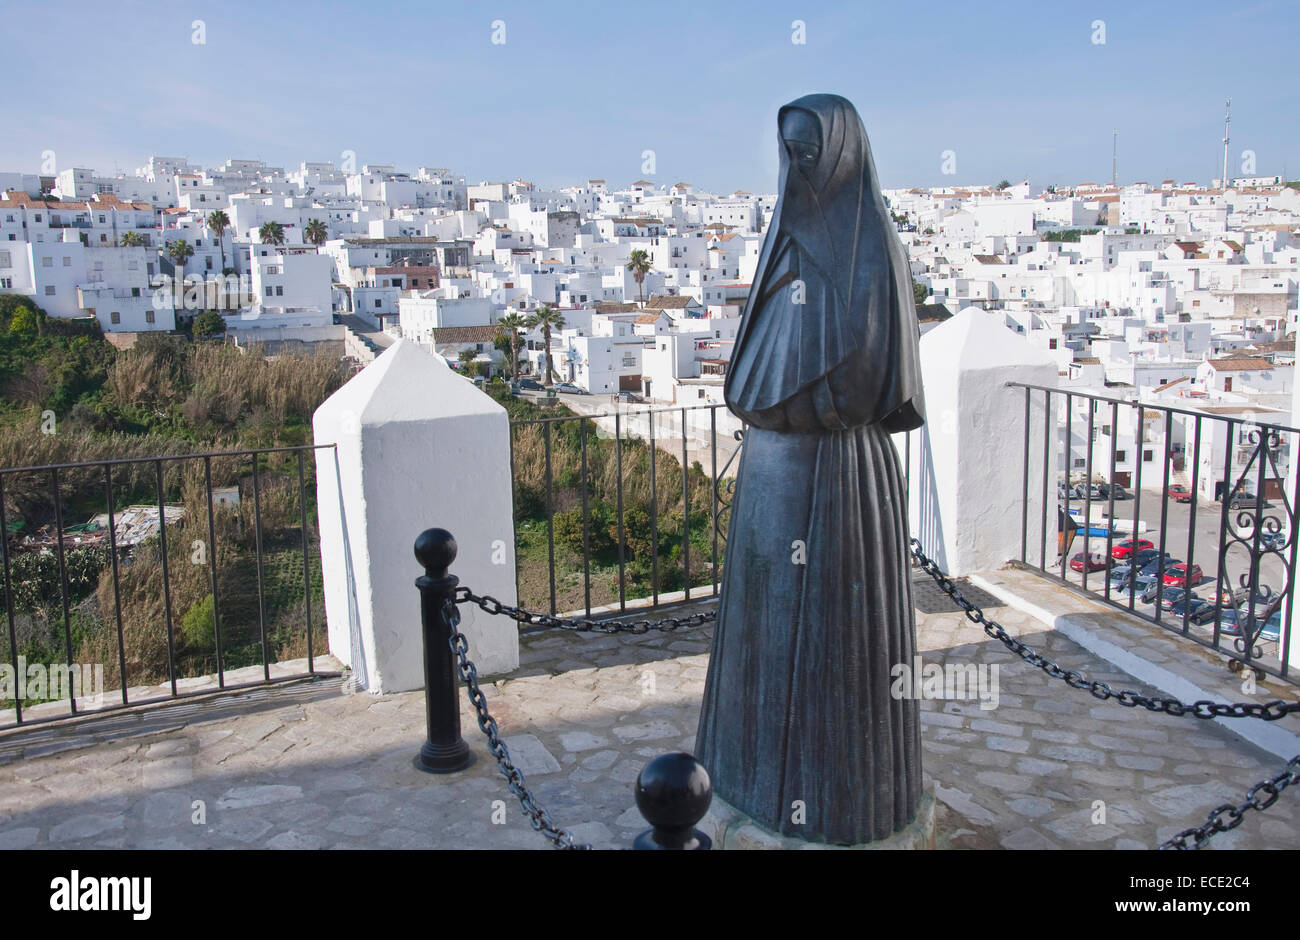 View of whitewashed village with sculpture of moorish women in foreground, Vejer de la Frontera, Andalusia, Spain Stock Photo